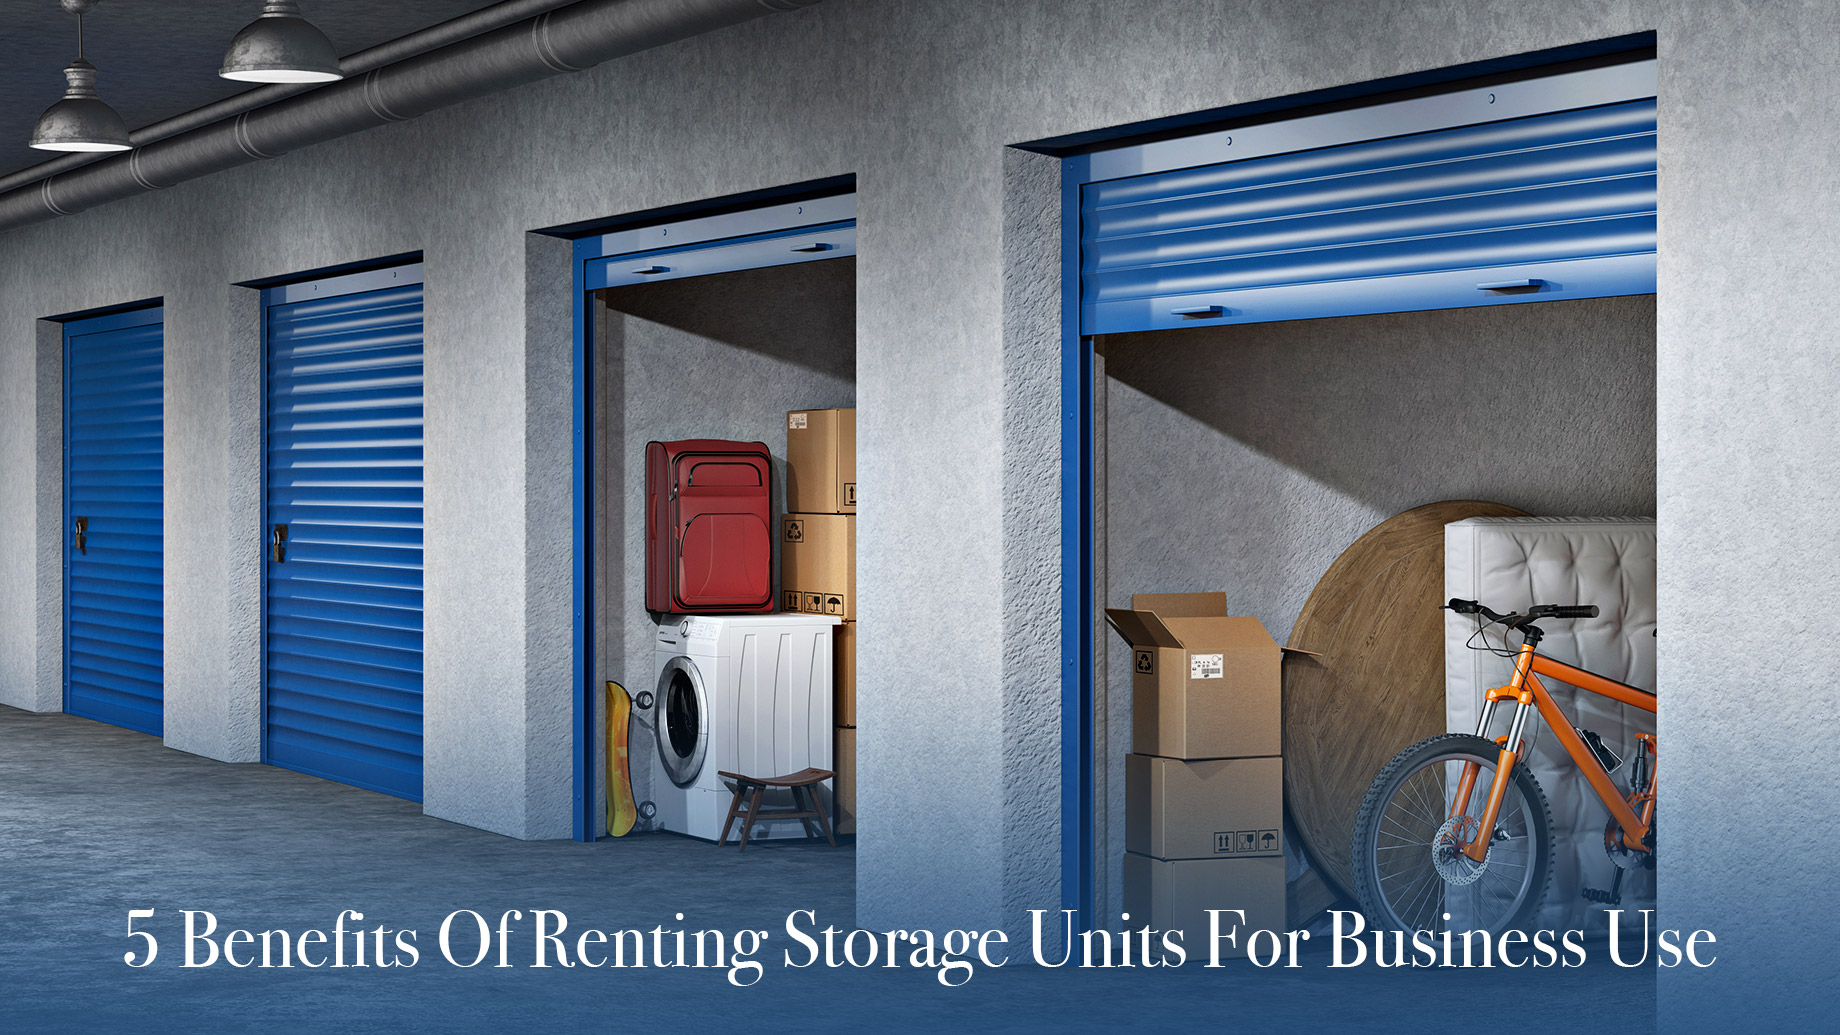 5 Benefits Of Renting Storage Units For Business Use